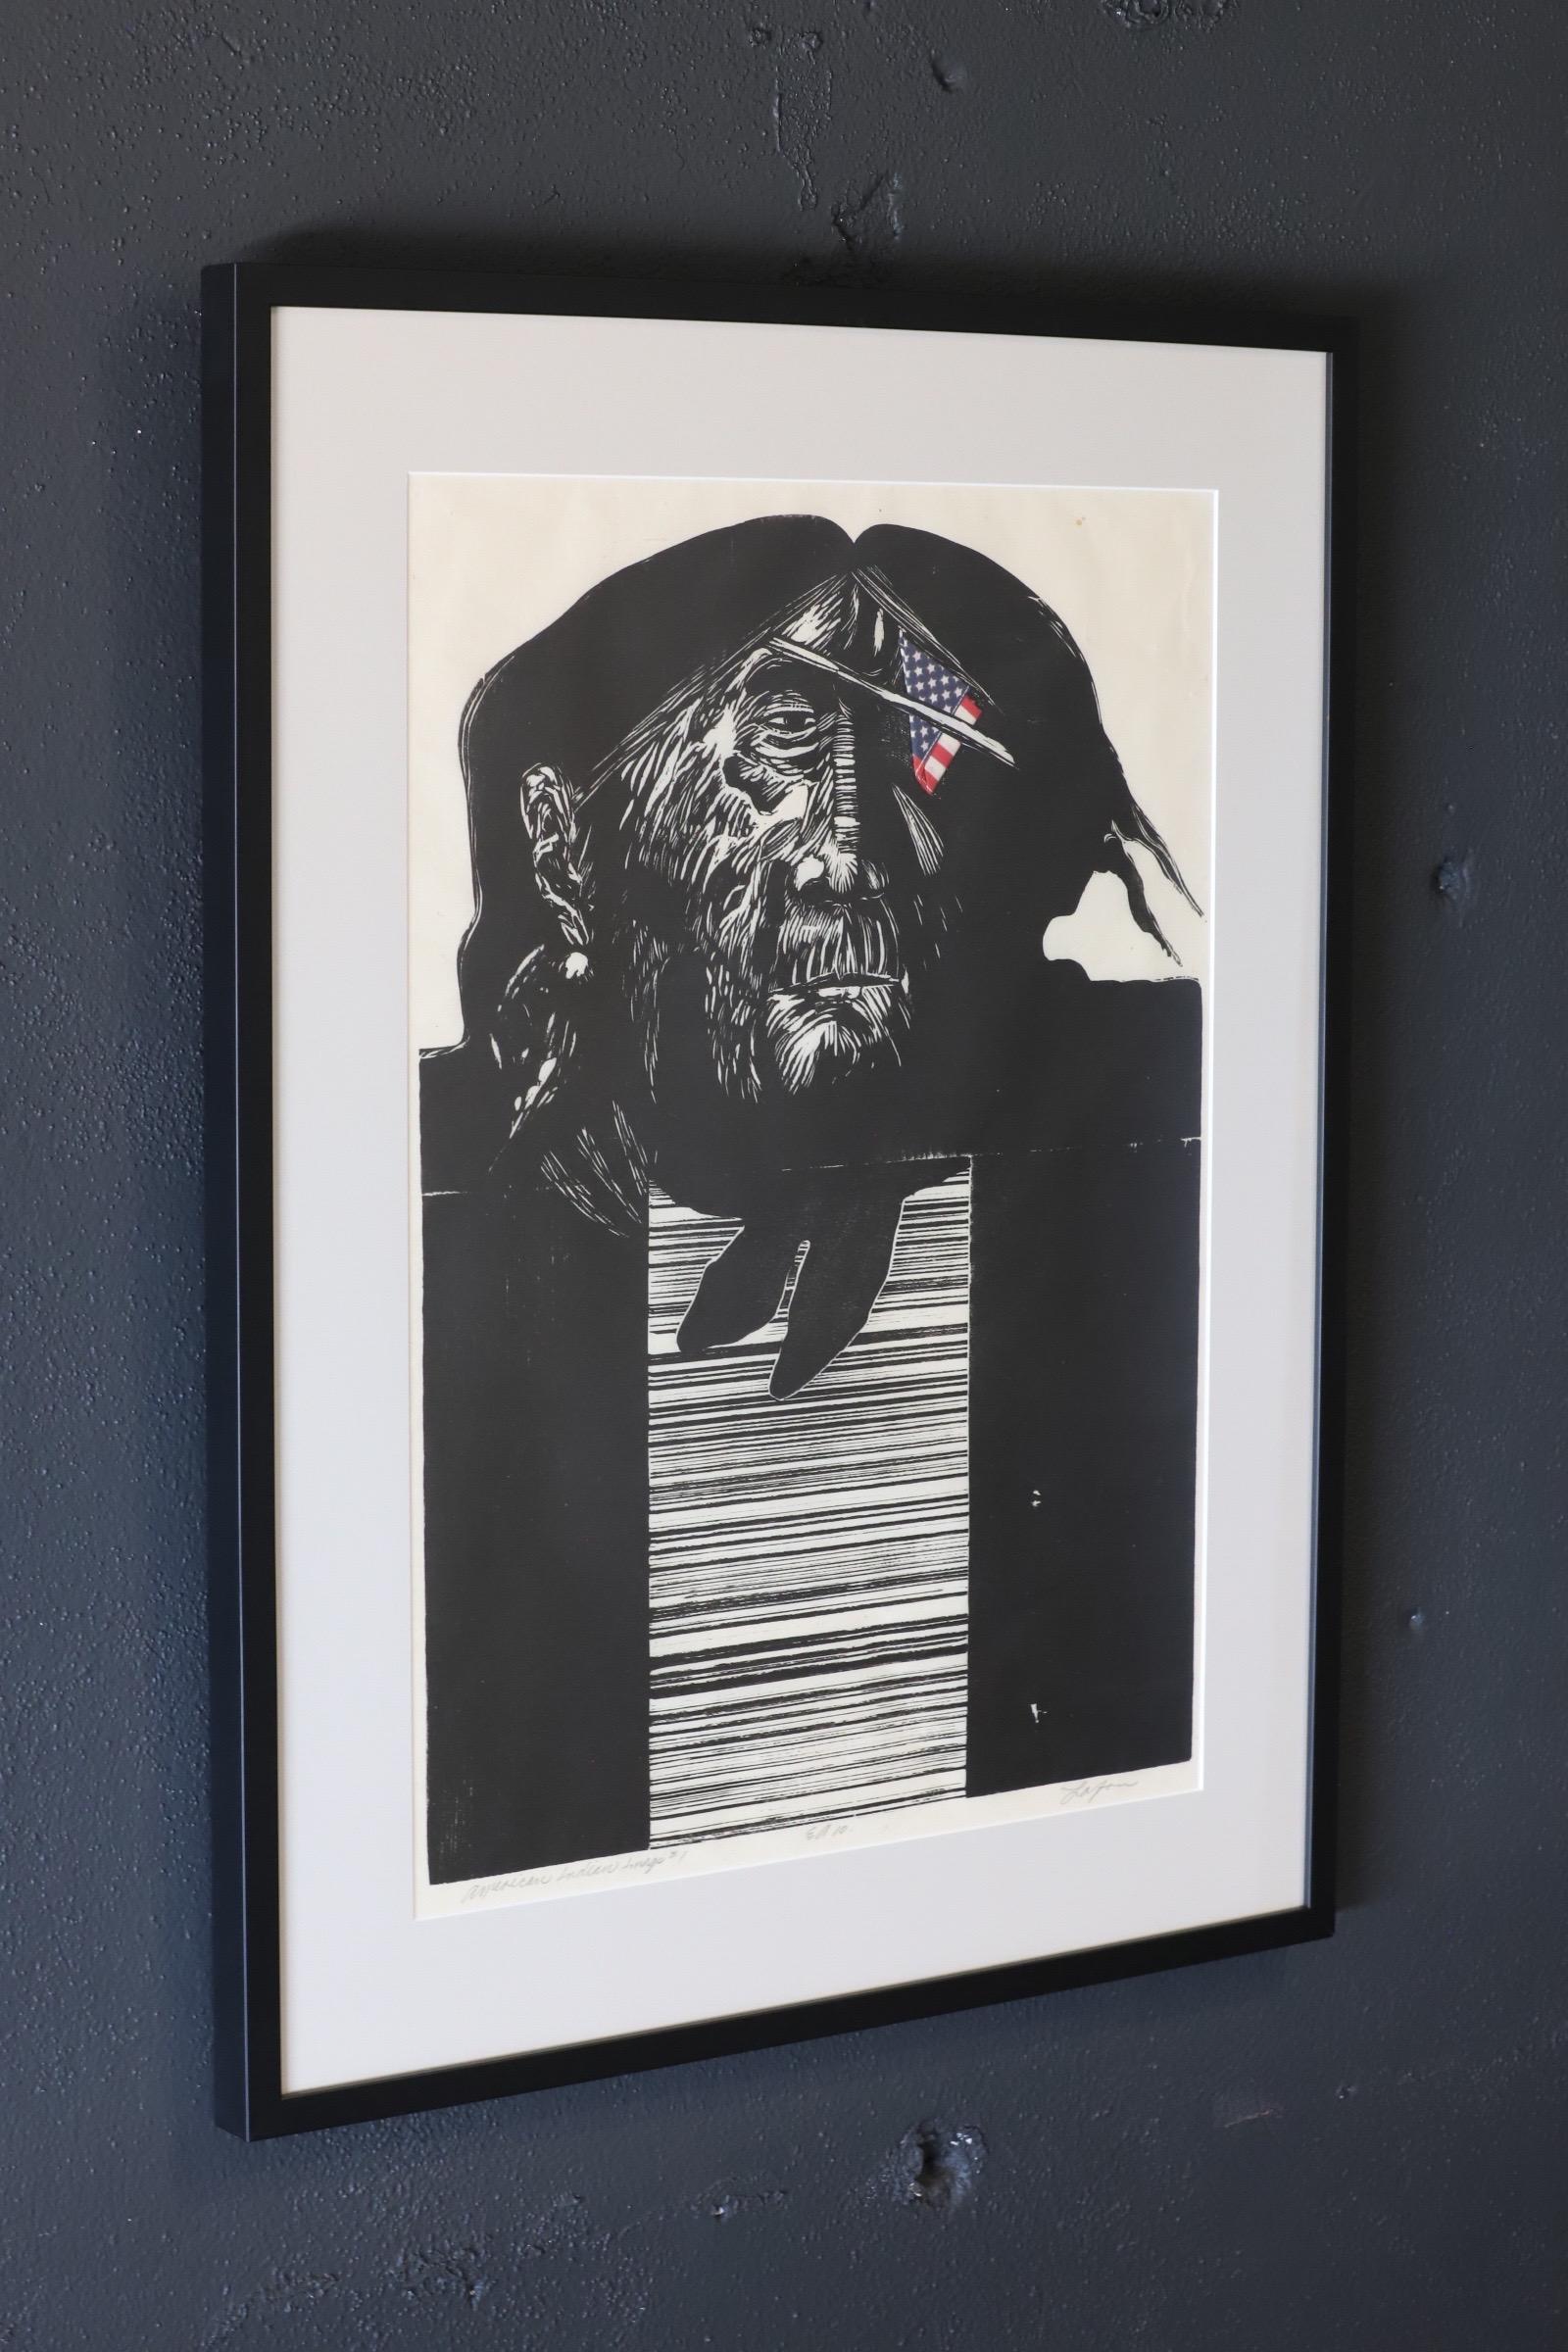 A very thought provoking etched image of an American Indian with folded United States flag as an eye patch. 